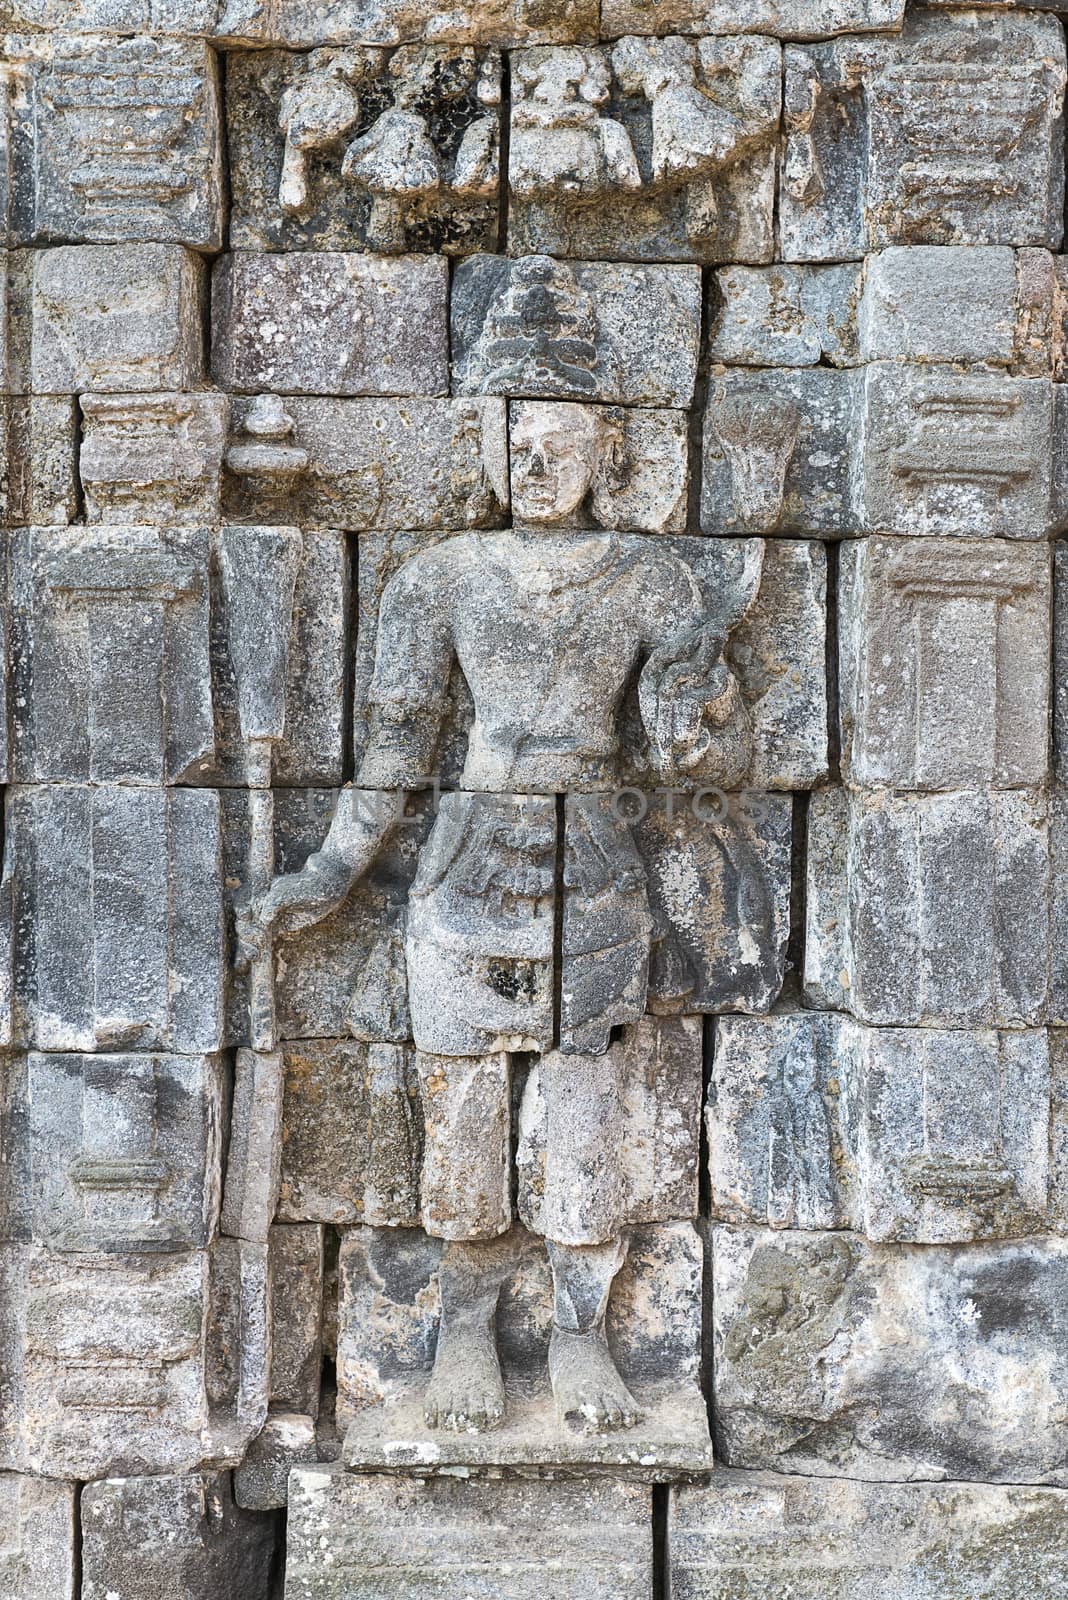 Images of Boddhisattva on wall of Perwara (guardian) temple in Candi Sewu complex. Candi Sewu means 1000 temples, which links it to the legend of Loro Djonggrang. In fact this complex has 253 building structures (8th Century) and it is the second largest Buddhist temple in Java, Indonesia.